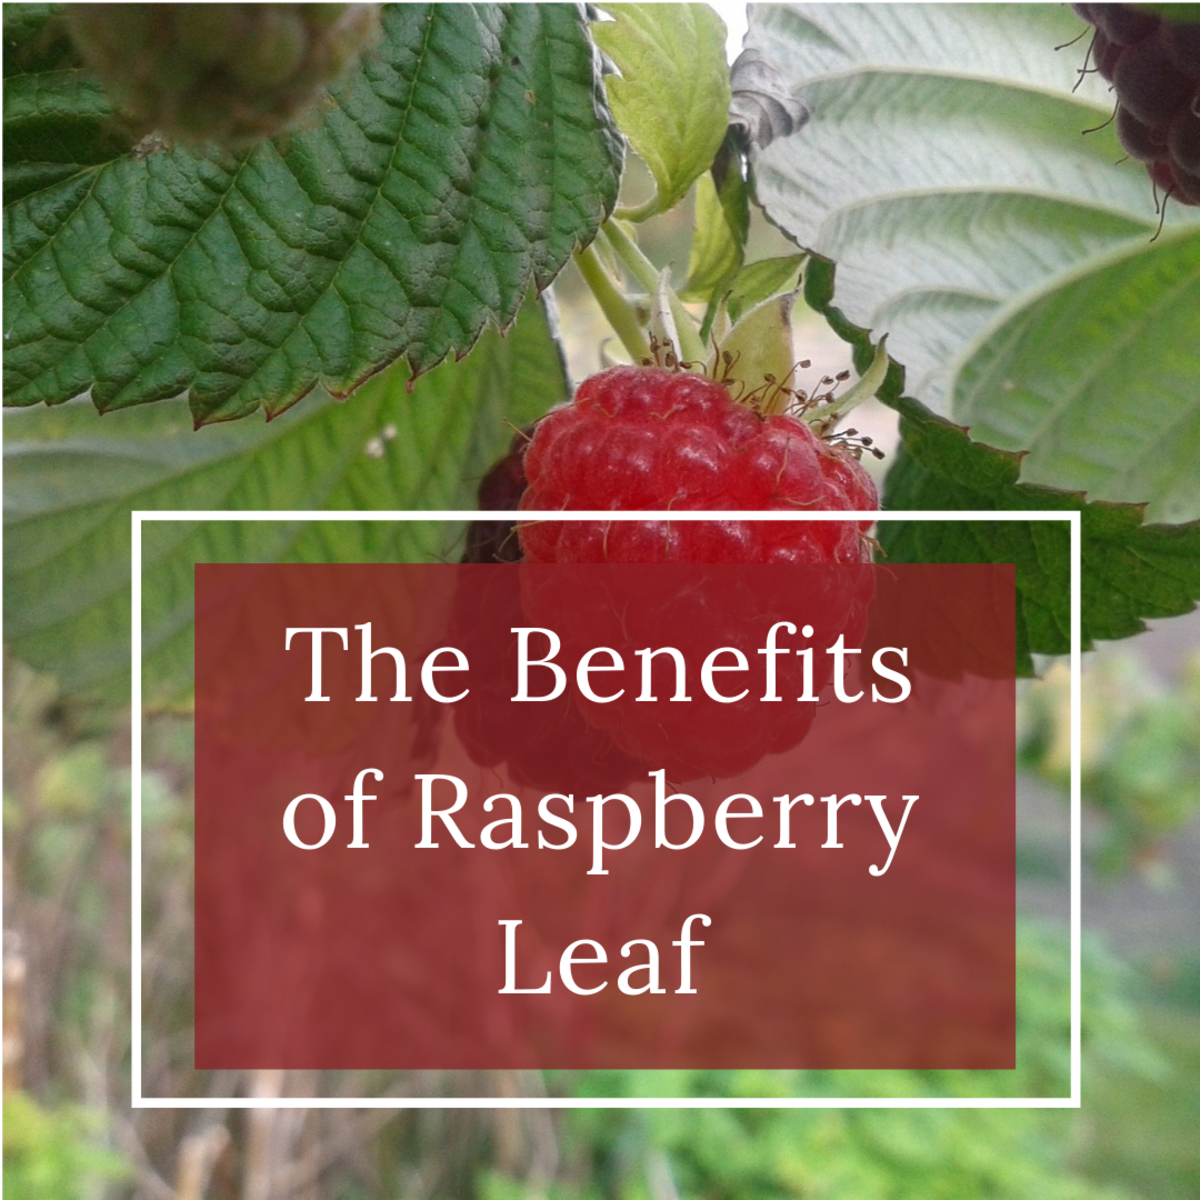 Raspberry Leaf Benefits for Women (and How to Make Tea)